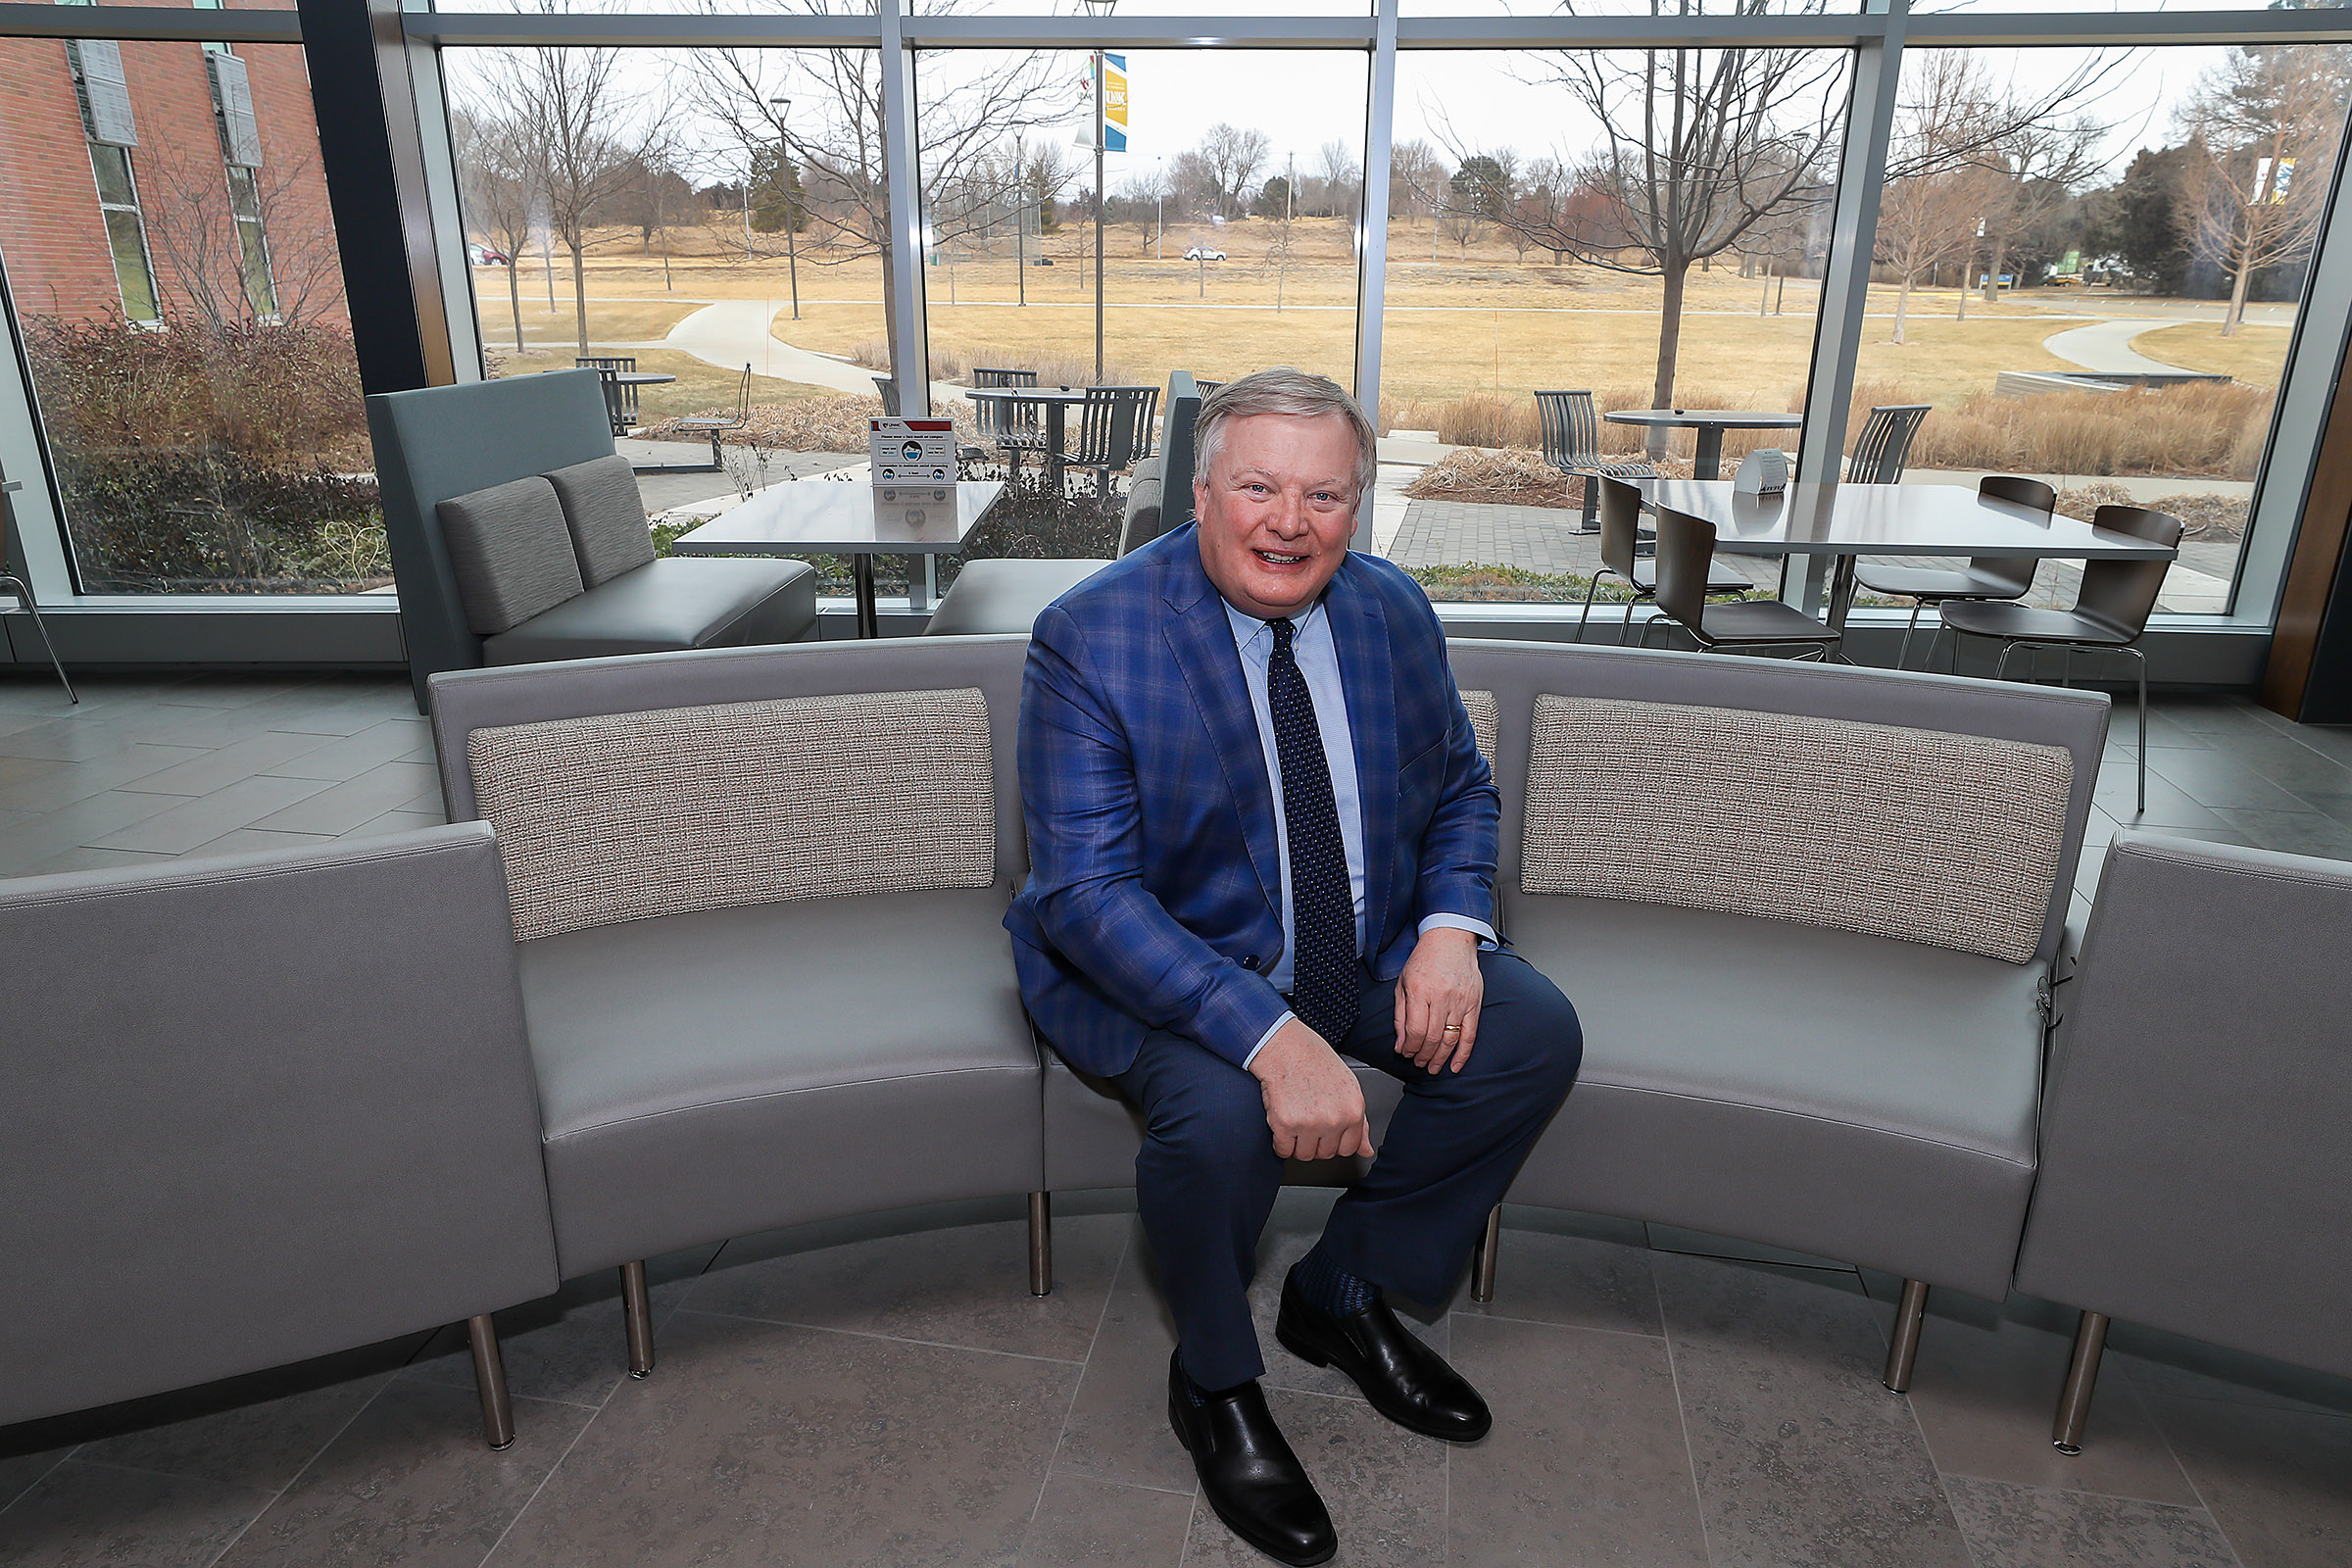 UNK Chancellor Doug Kristensen is pictured inside the Health Science Education Complex on campus, with the site of the proposed Rural Health Education Building in the background. (Photo by Erika Pritchard, UNK Communications)